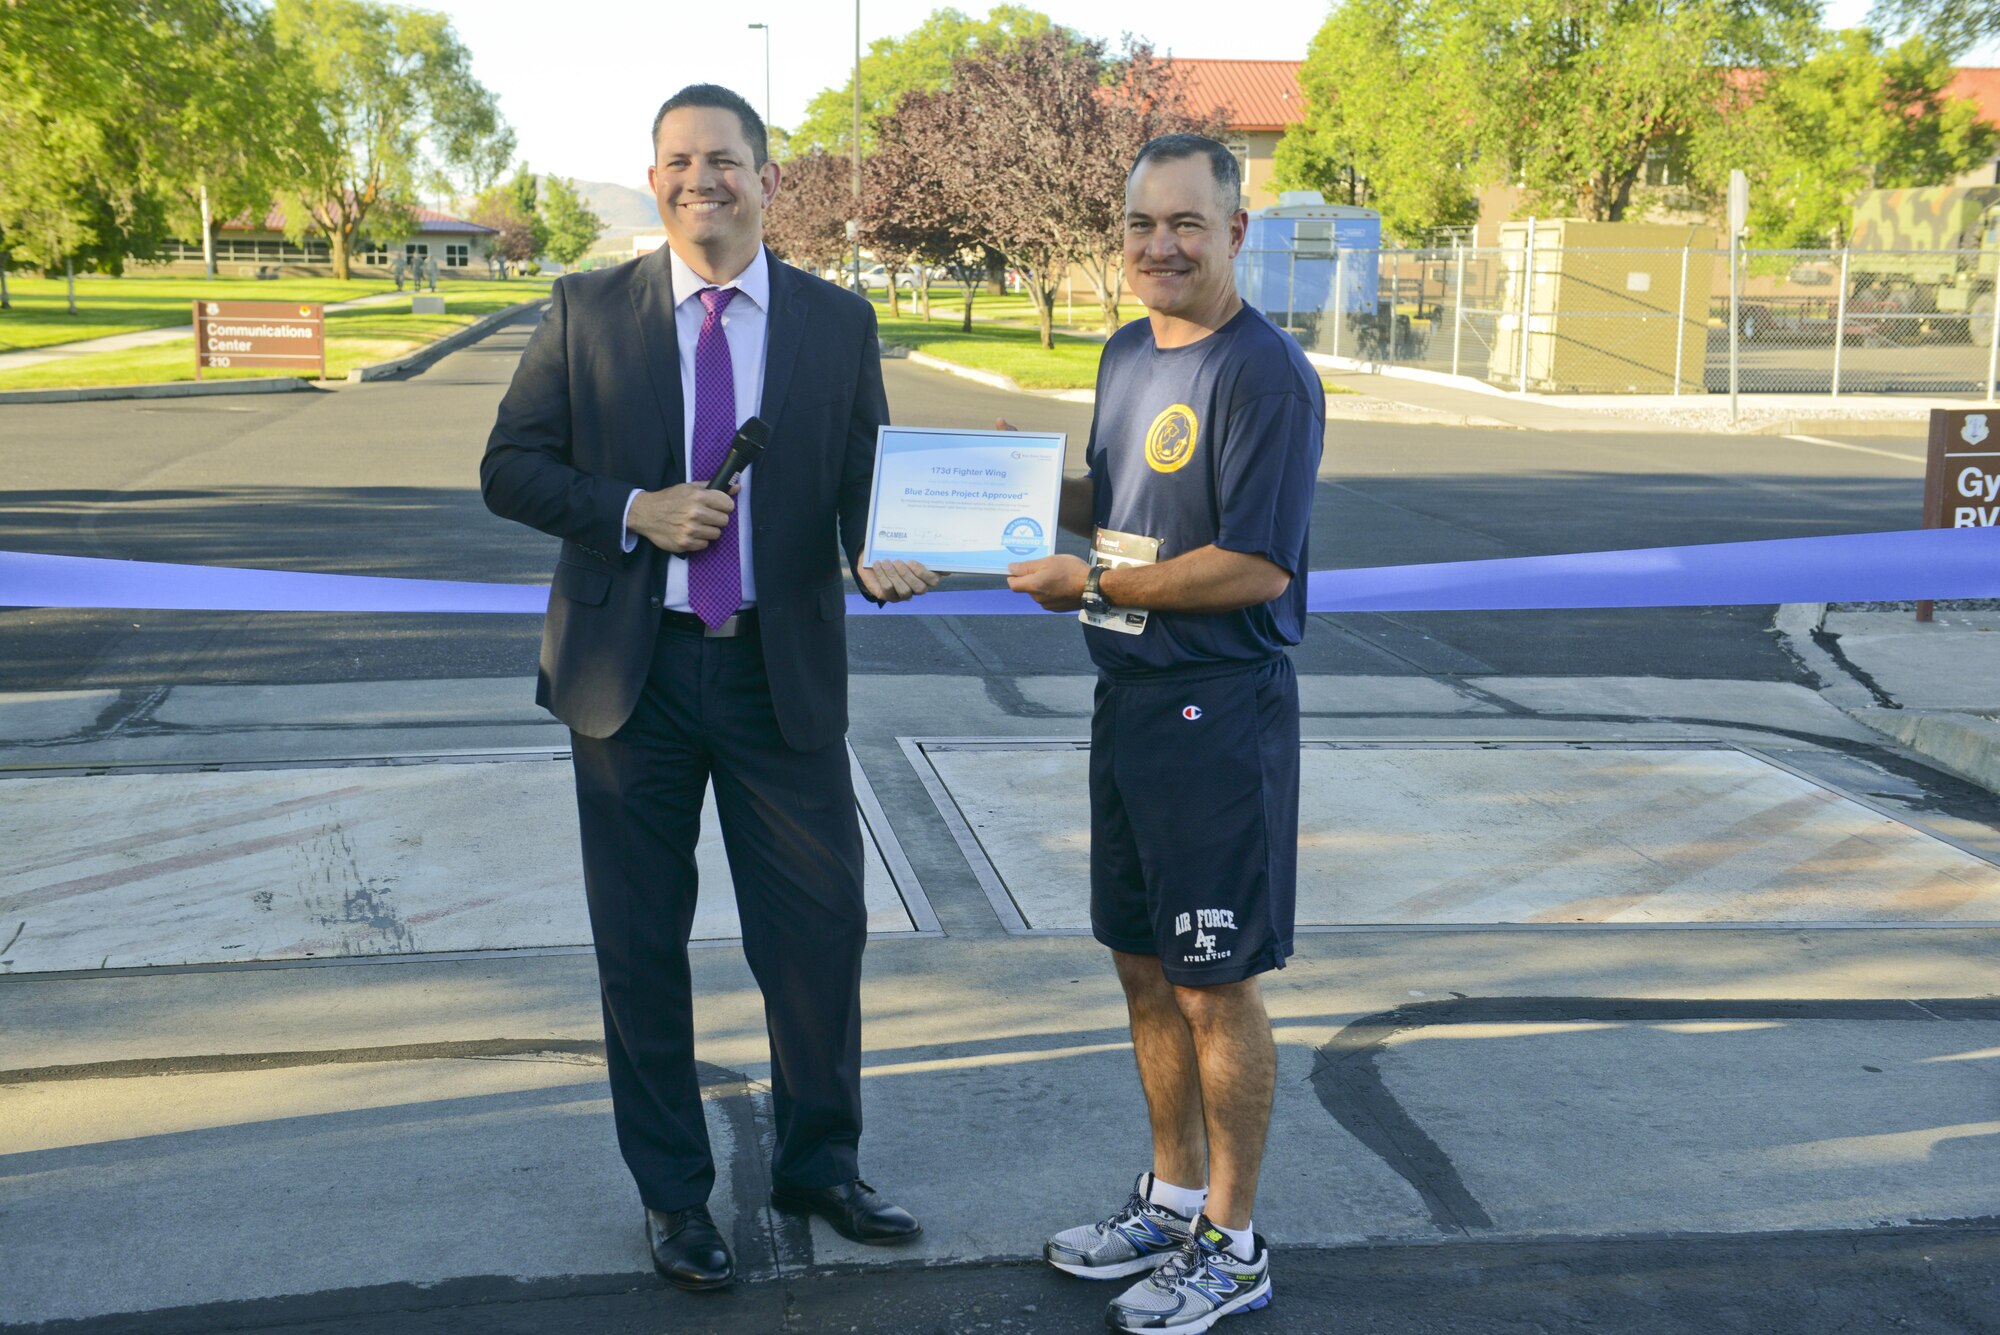 Klamath County Commissioner Derrick DeGroot presents a Blue Zones Project Approved Worksite certificate to Col. Jeff Smith, 173rd Fighter Wing commander, at the Blue Zones Project ribbon cutting ceremony and Sentry Eagle 5K run/walk July 20, 2017, at Kingsley Field in Klamath Falls, Ore. The ribbon cutting ceremony designated Kingsley Field as a Blue Zones Project Approved Worksite and was followed by the Sentry Eagle 5K run/walk. The Blue Zones Project encourages changes in communities that lead to healthier options. (U.S. Air National Guard photo by Staff Sgt. Riley Johnson)